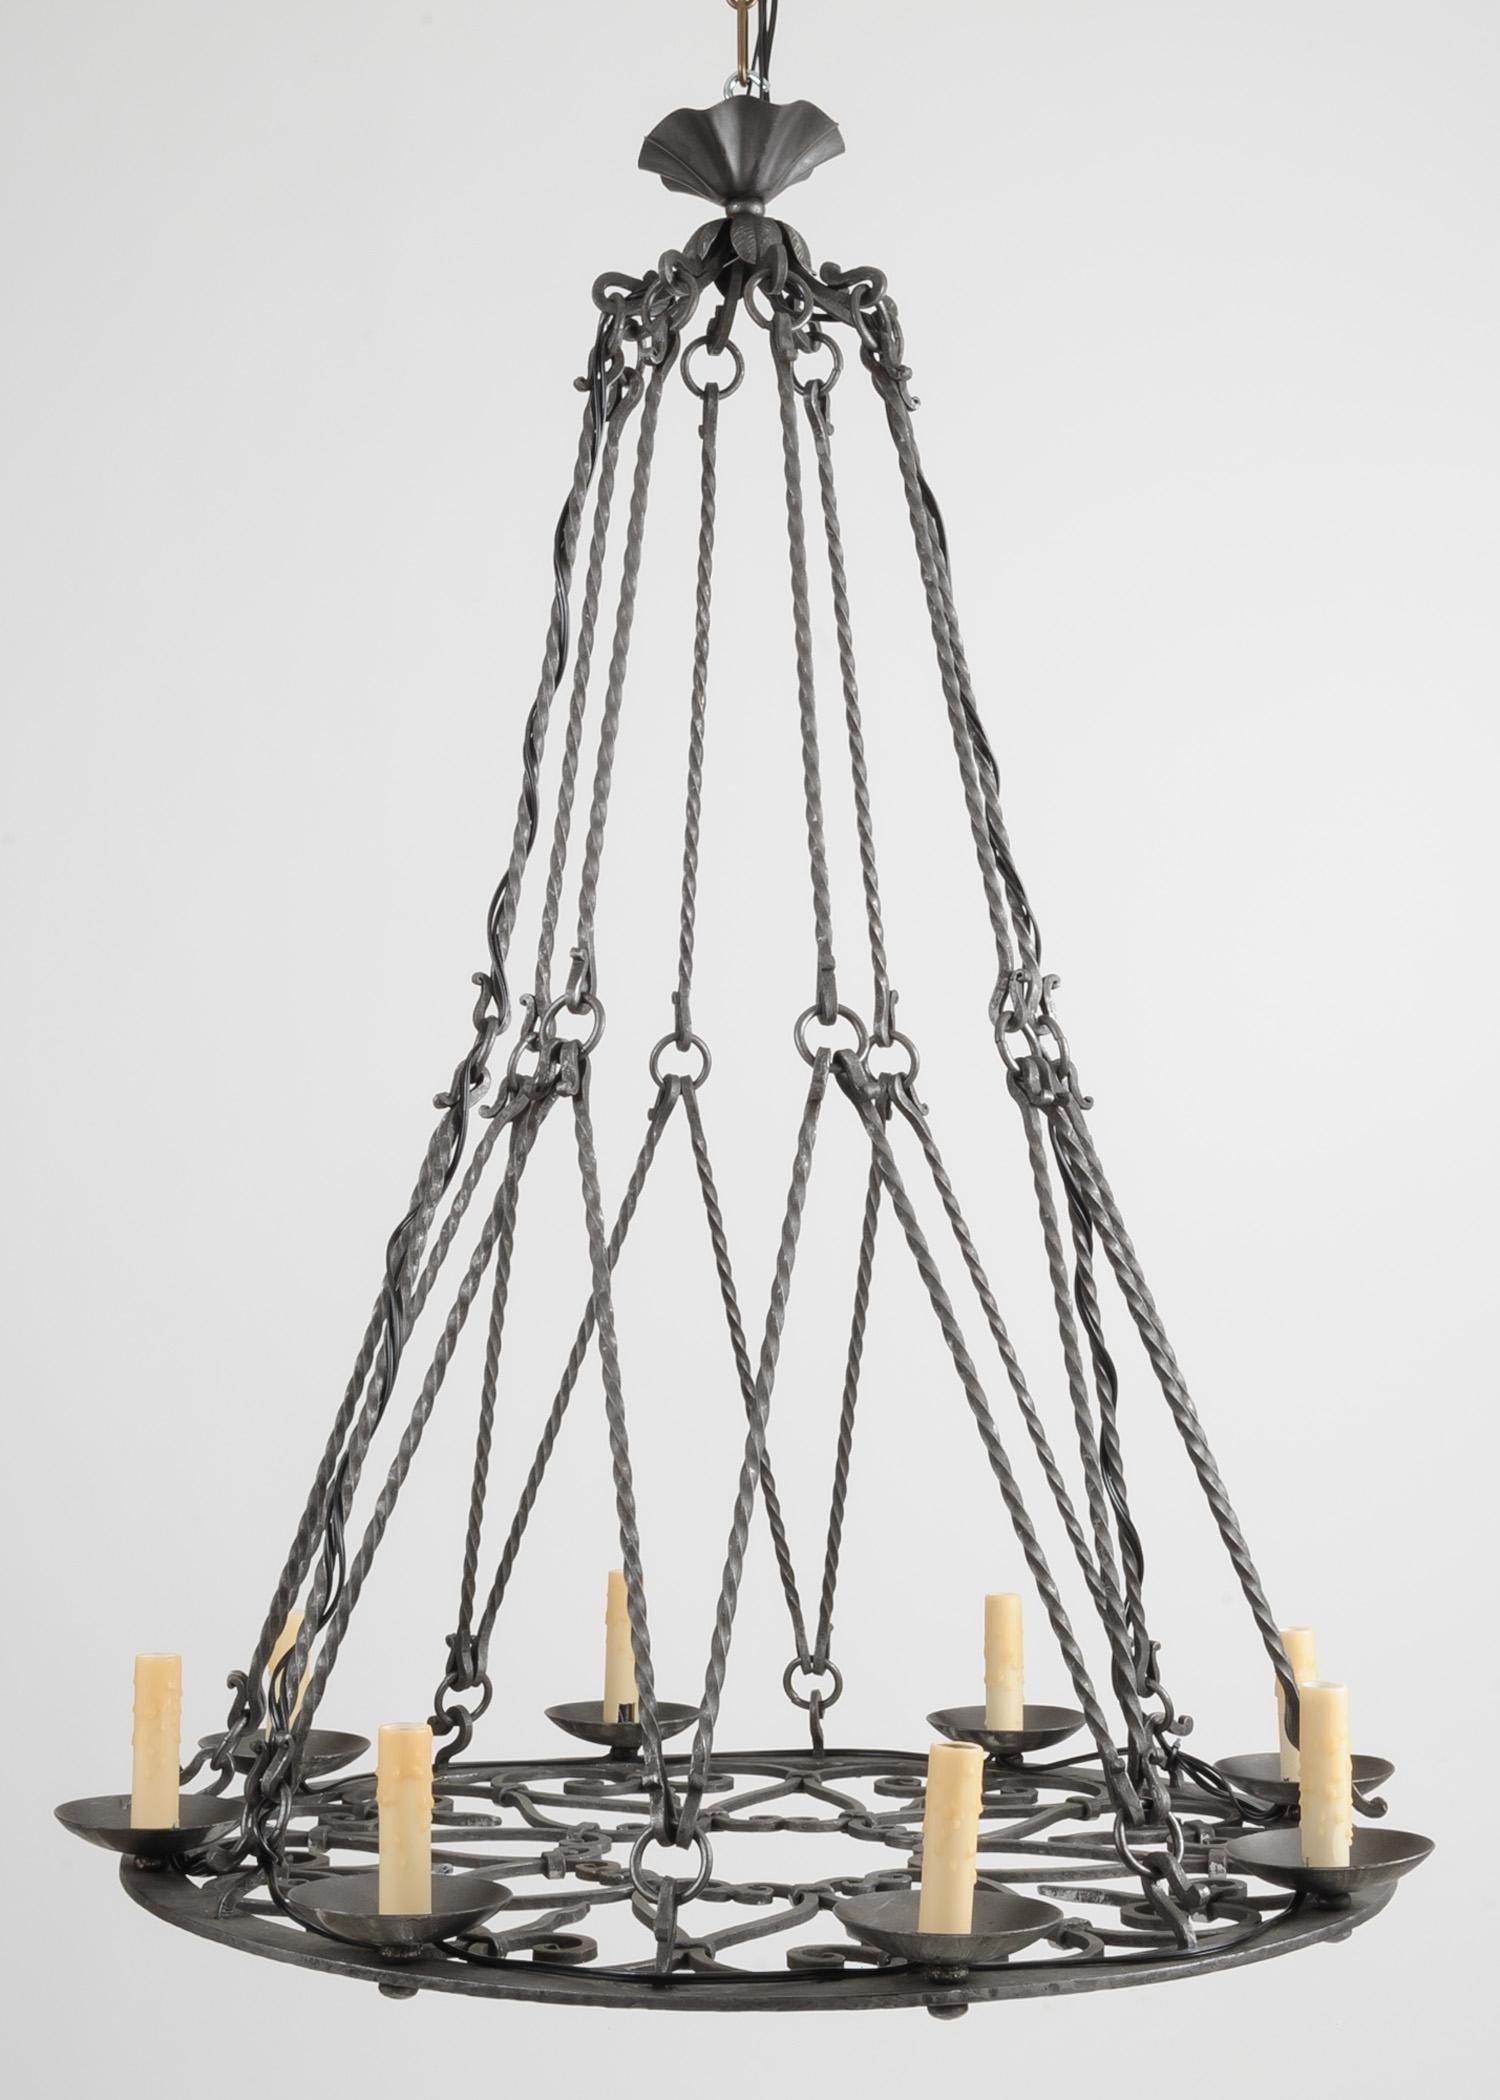 Large 19th century iron chandelier, electrified with eight lights and beeswax candle covers. The chandelier is made up of a circular base with heart and scroll detail suspended by twist and ring iron supports. Newly wired for US use.
The chandelier